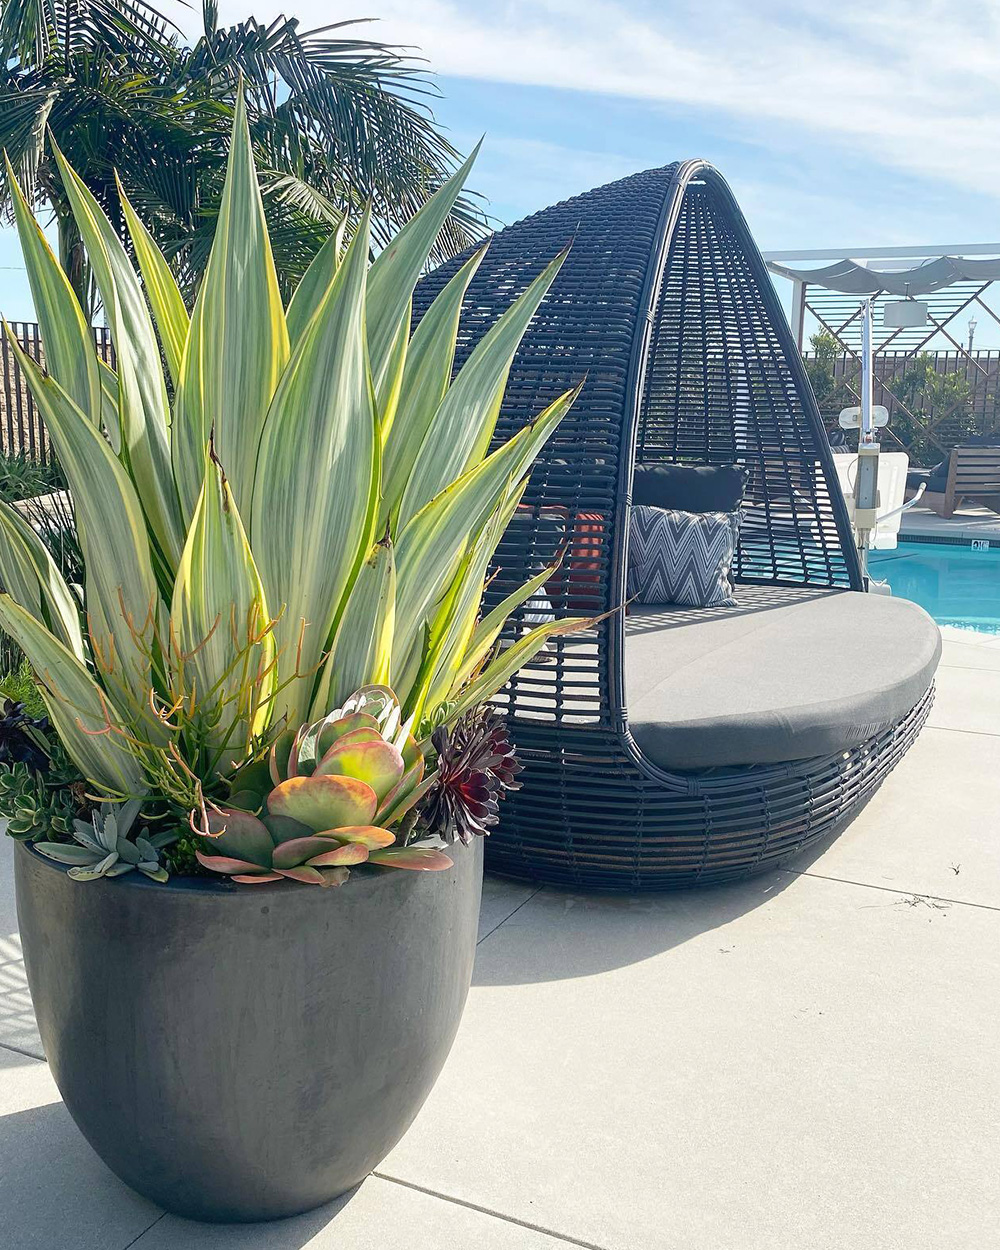 Succulents and poolside furniture